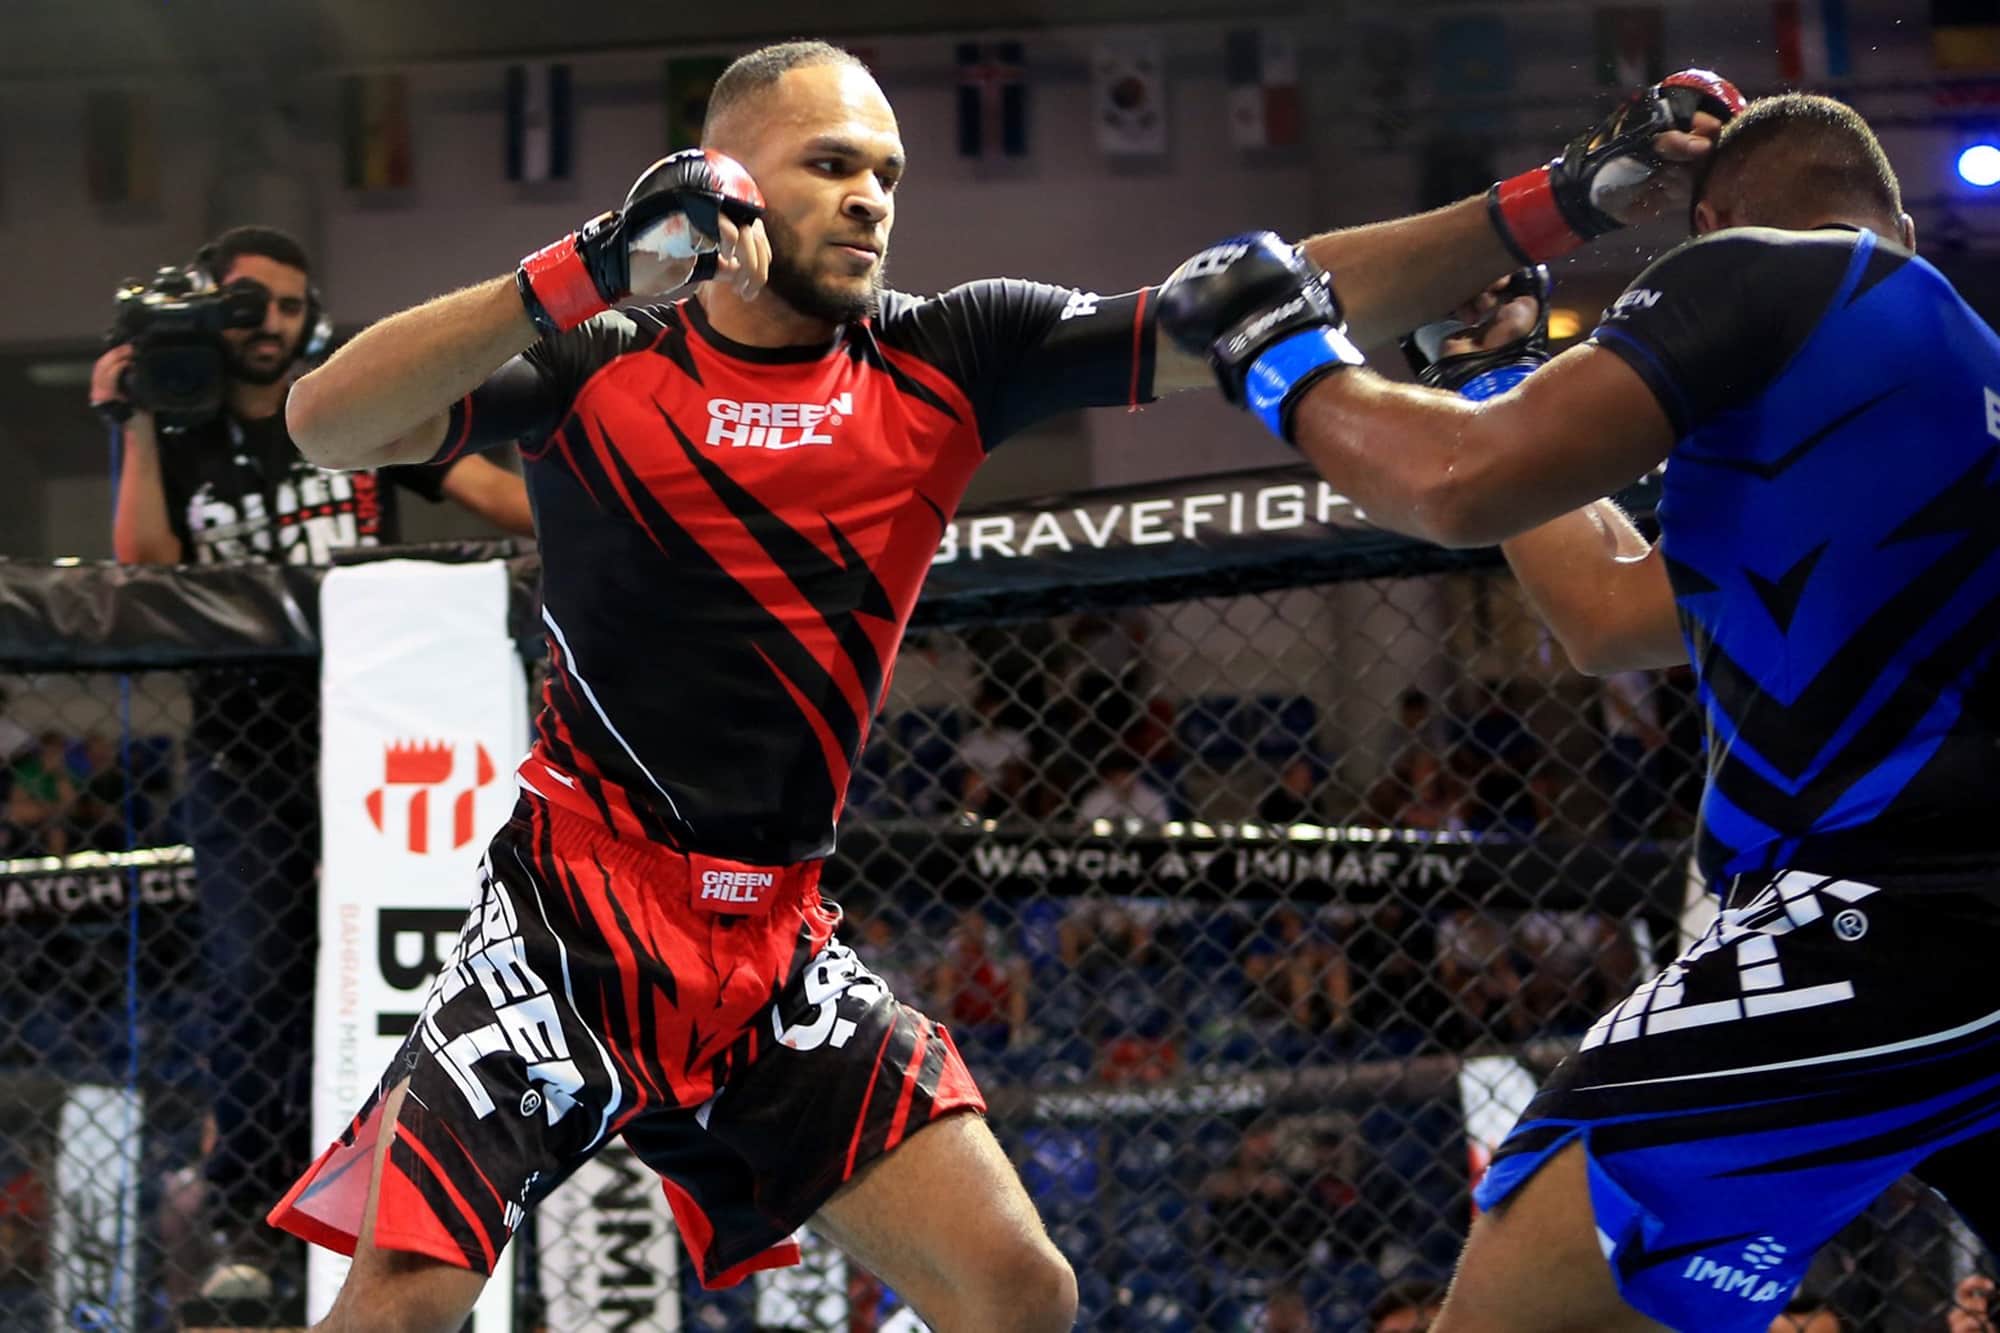 Christian Duncan Continues His Rise Plus Mixed Fortunes For IMMAF Alumni at Cage Warriors: The Trilogy